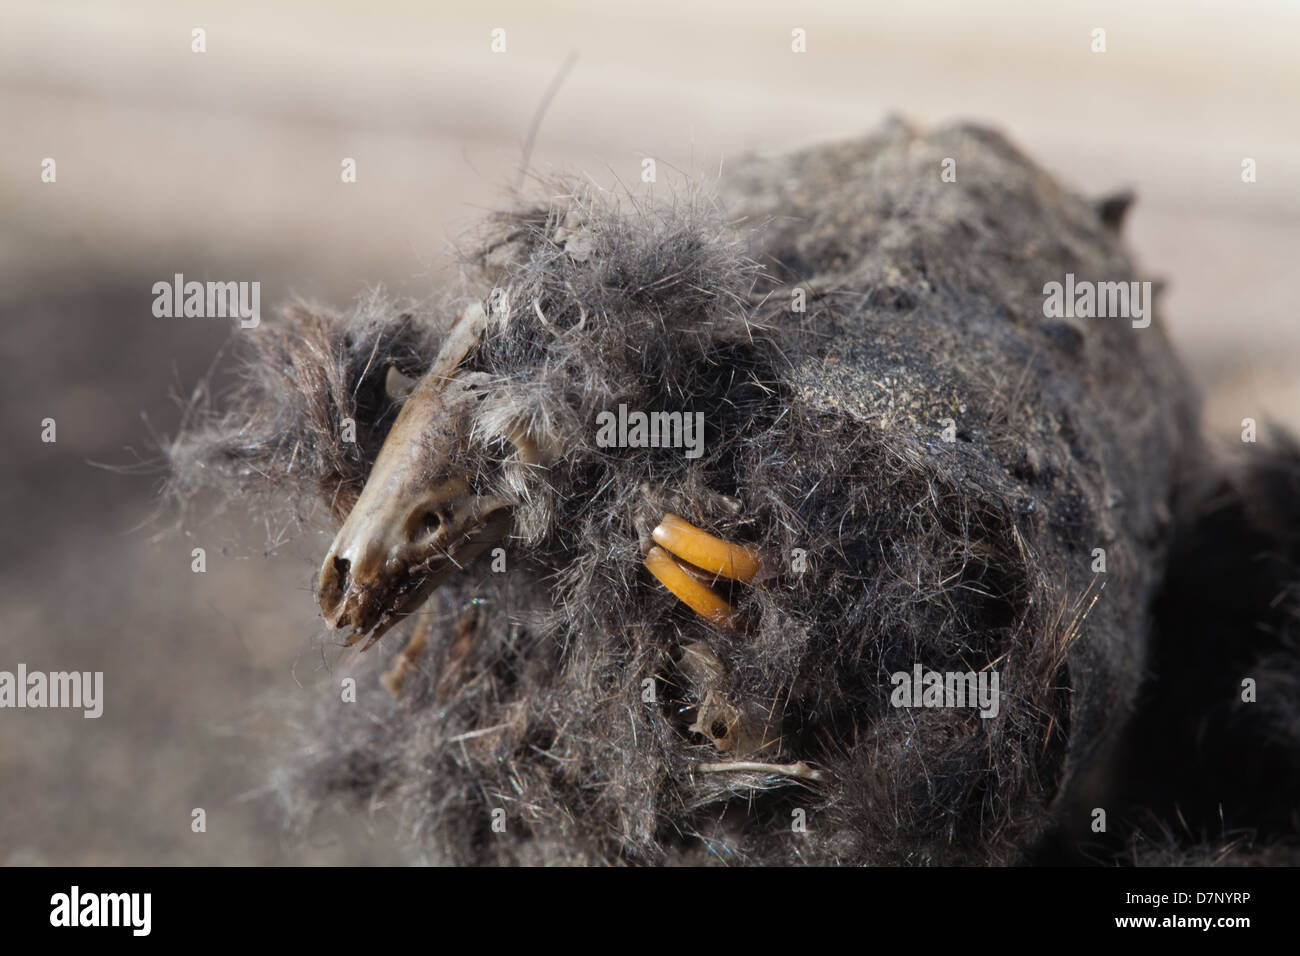 Pellet regurgitated by a Barn Owl (Tyto alba). Pellet broken in half to reveal skull of a shrew Sorex sp.  and Rodent incisors. Stock Photo